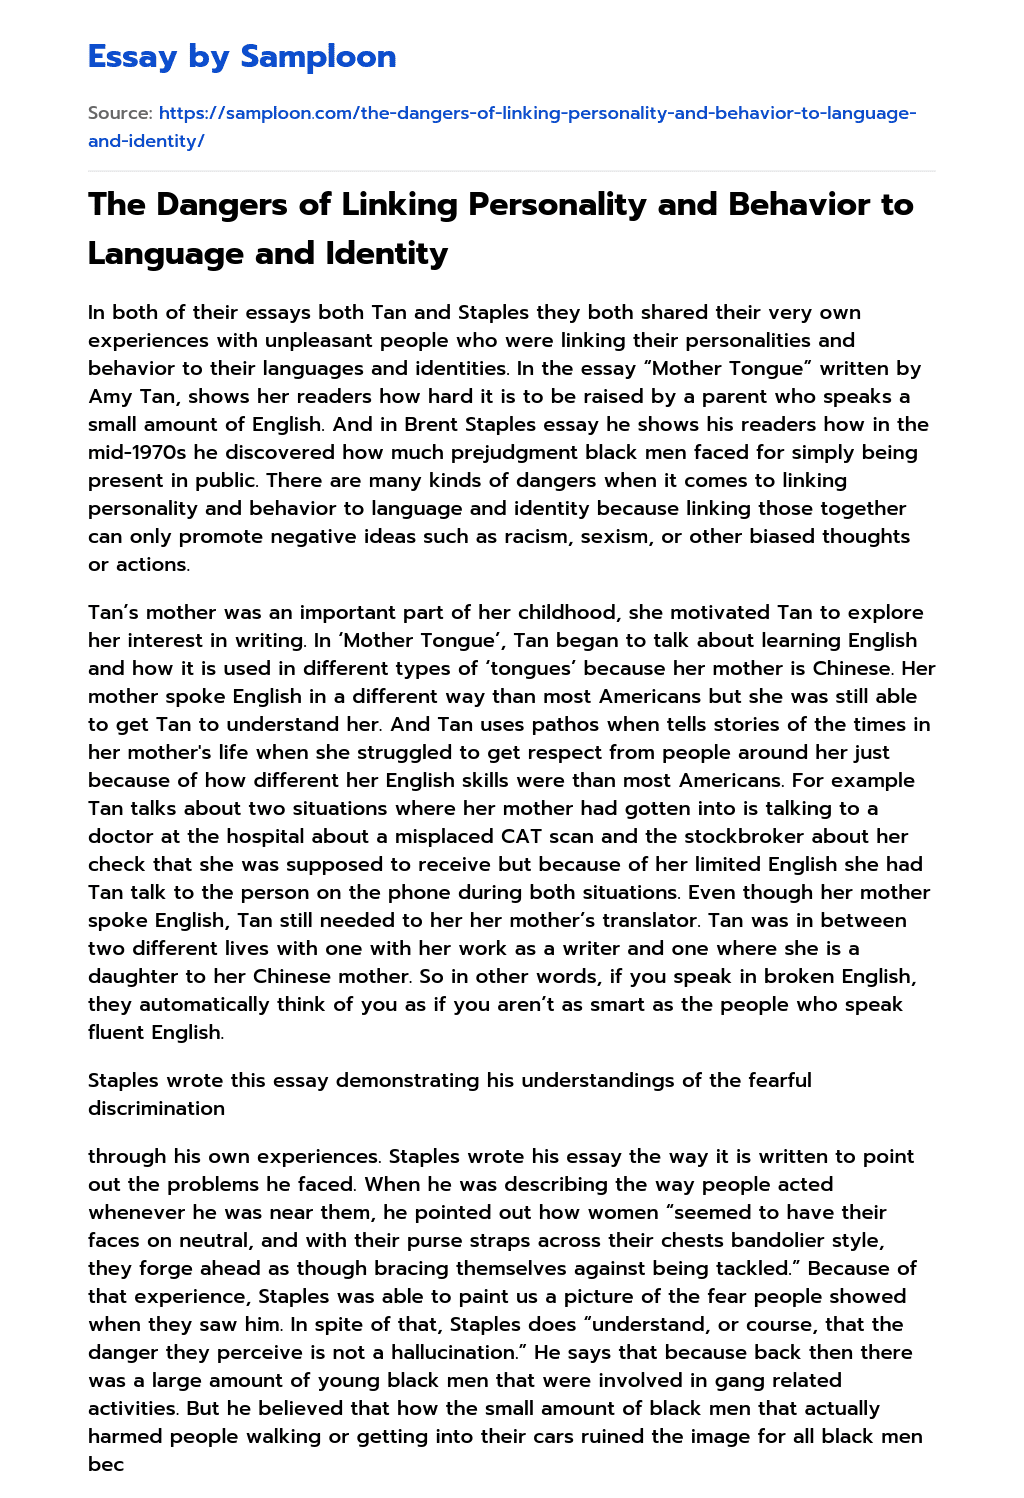 The Dangers of Linking Personality and Behavior to Language and Identity essay